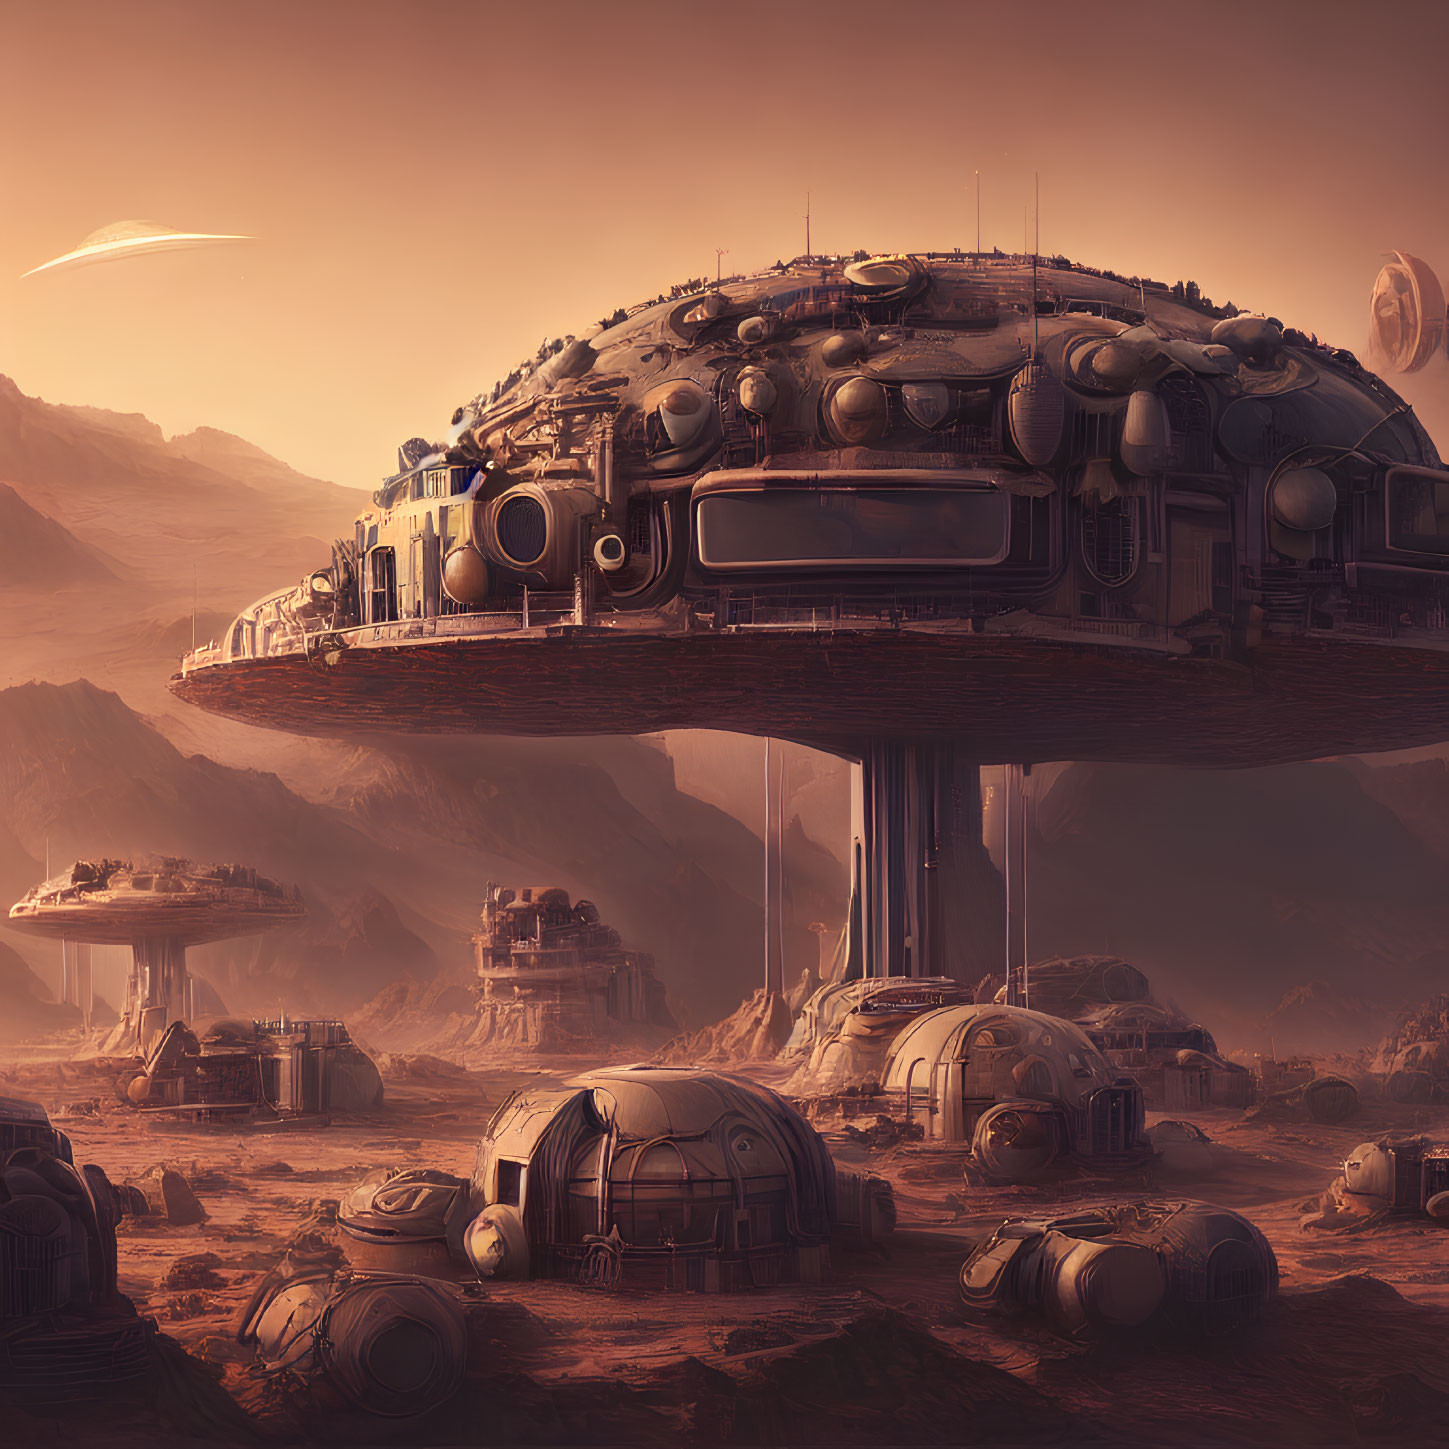 Futuristic Mars-like landscape with domed structures and amber sky